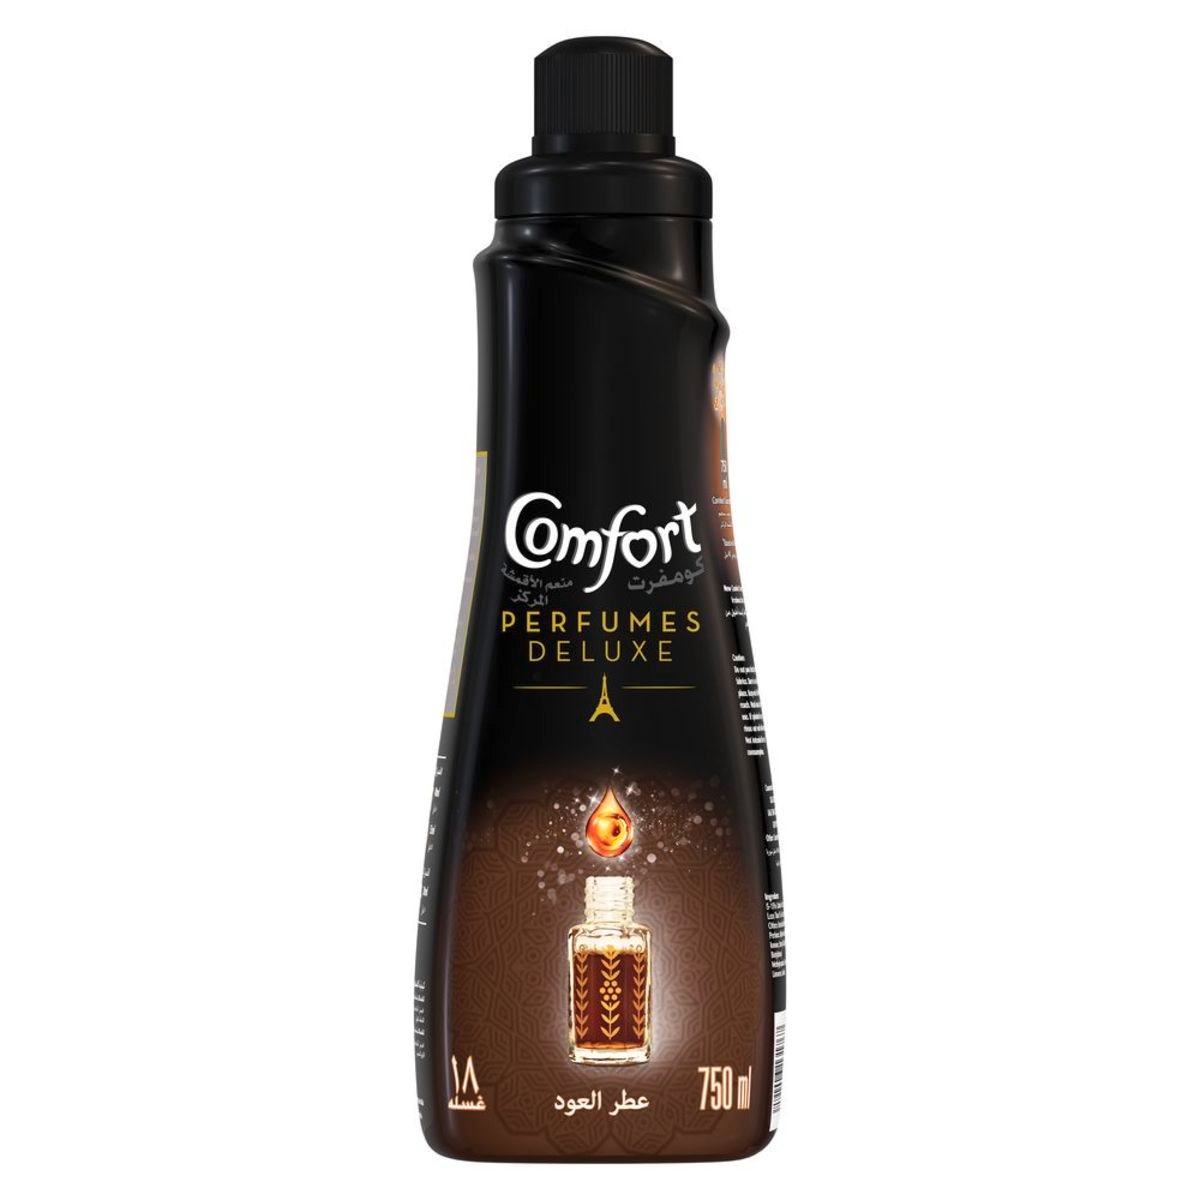 Comfort Perfumes Deluxe Concentrated Fabric Softener Luxurious Oud 750ml